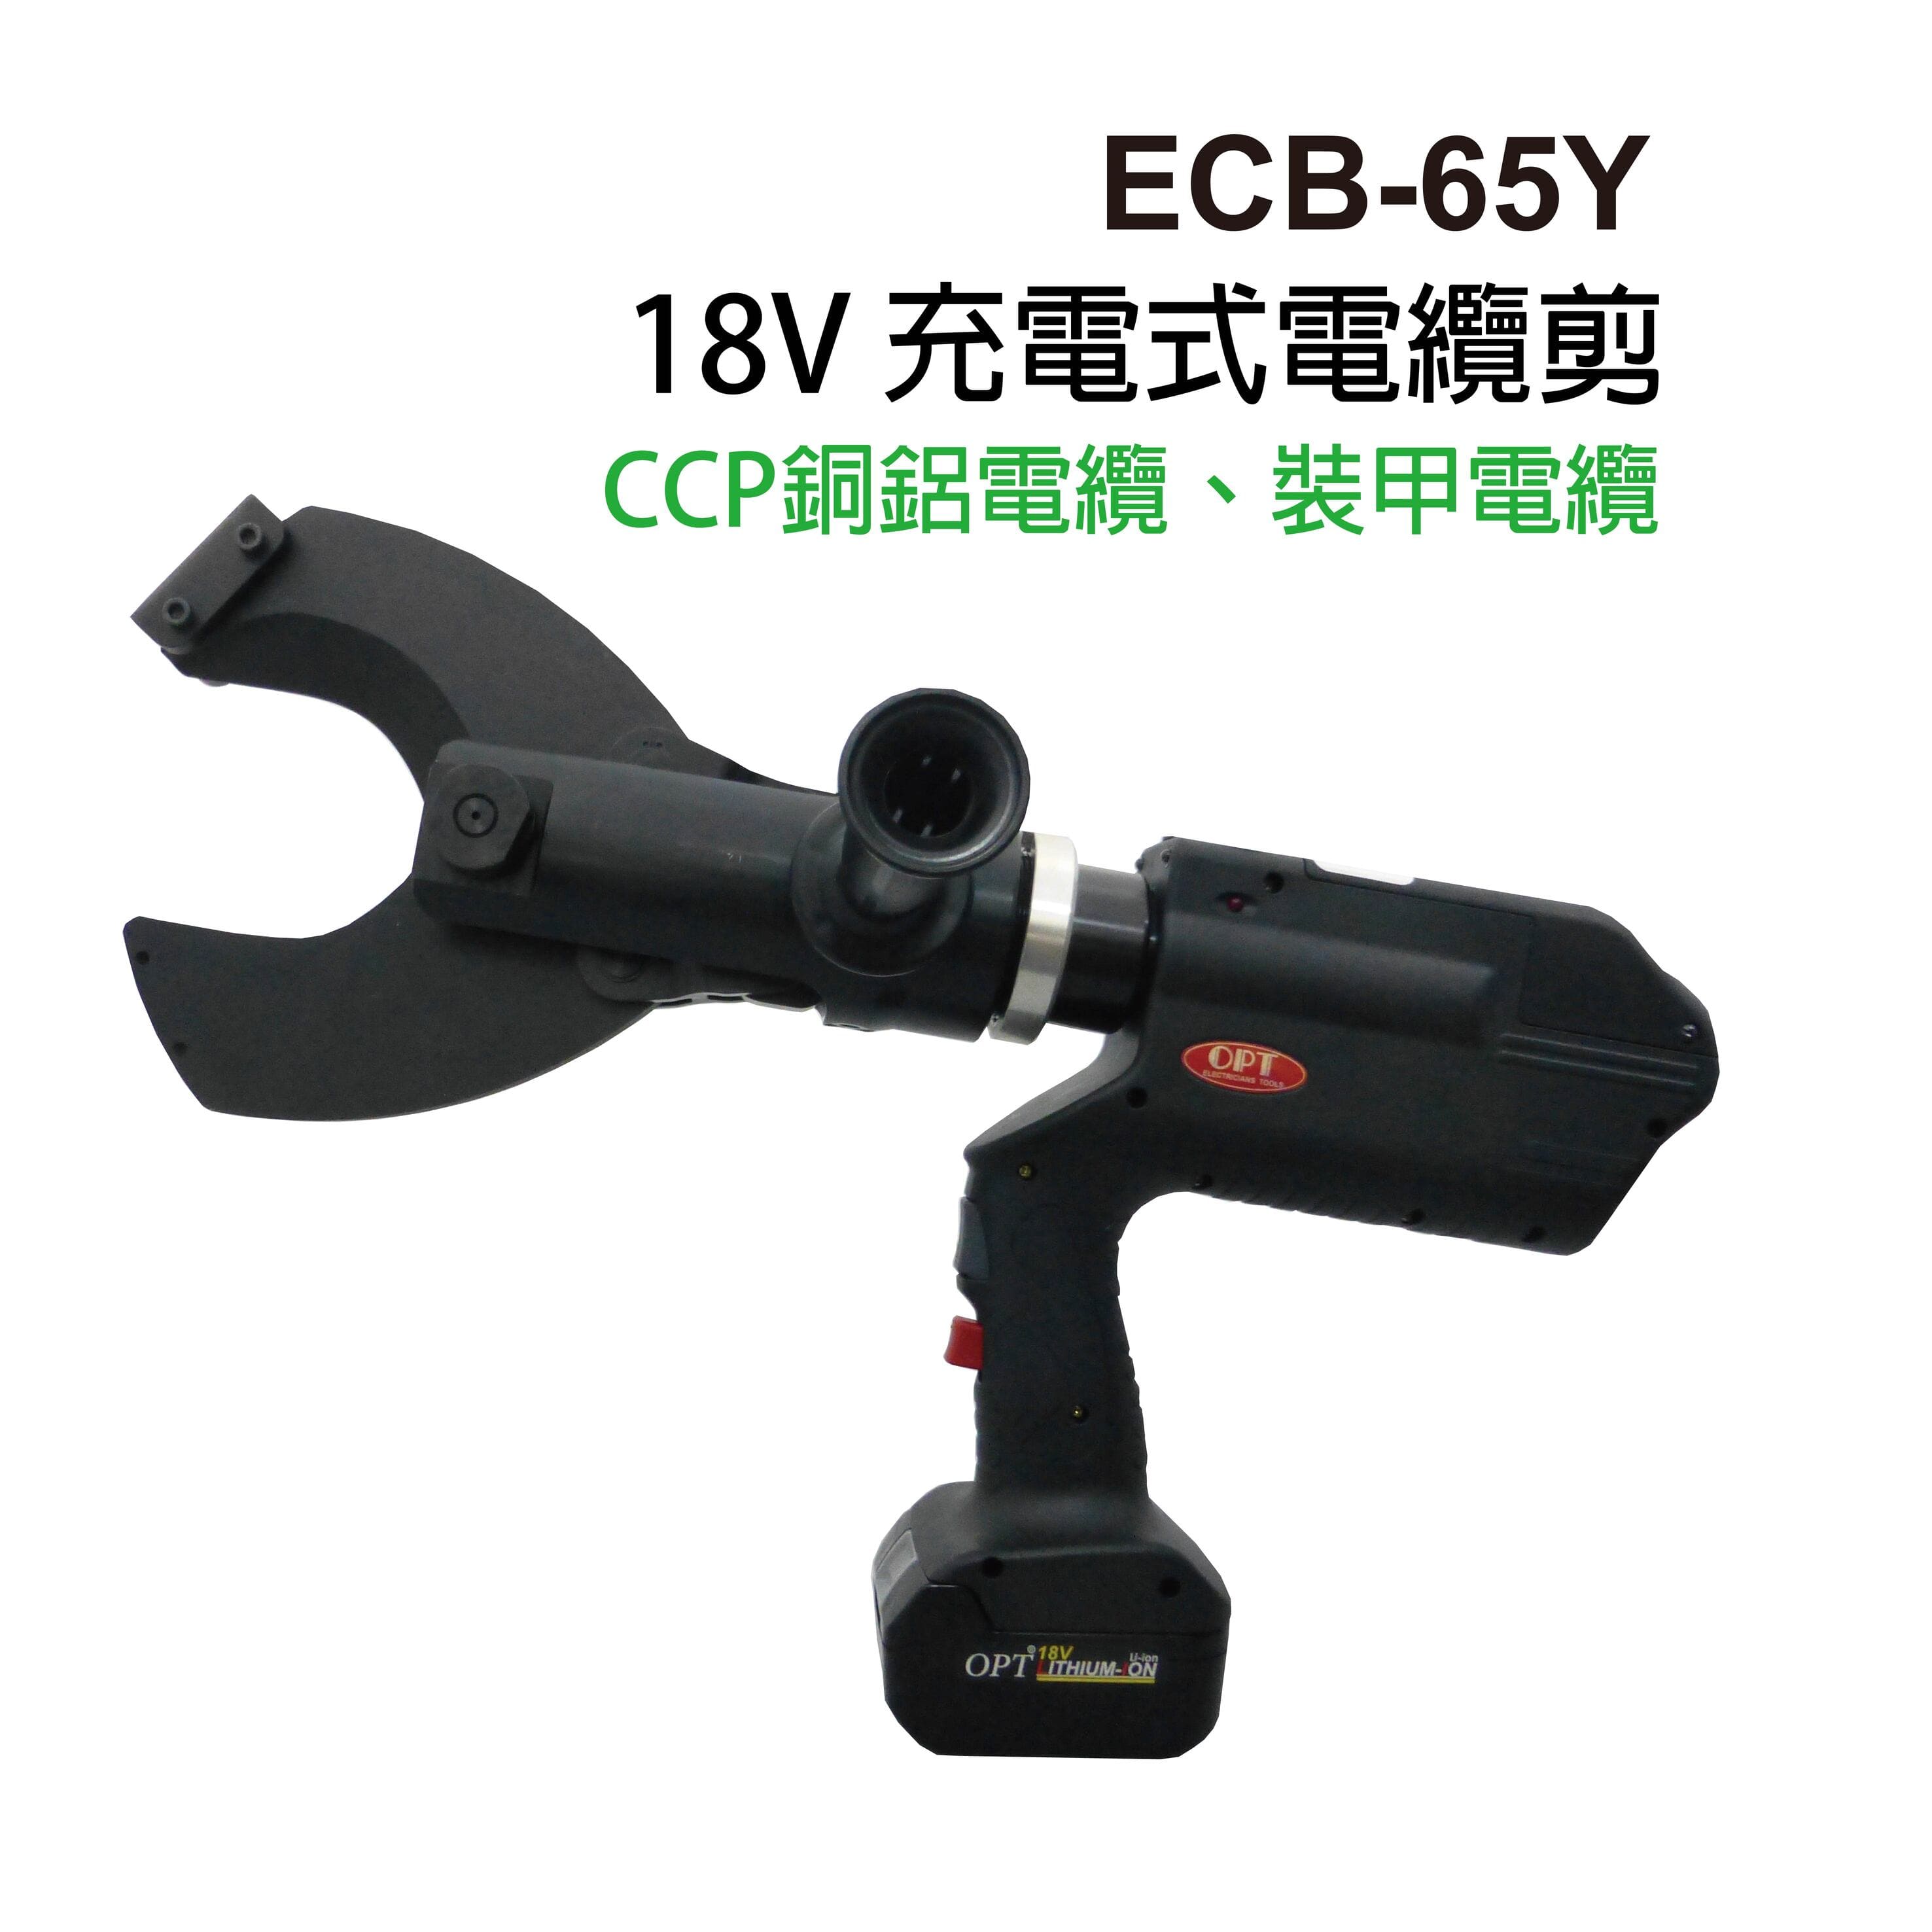 ECB-65Y CORDLESS HYDRAULIC CABLE CUTTERS